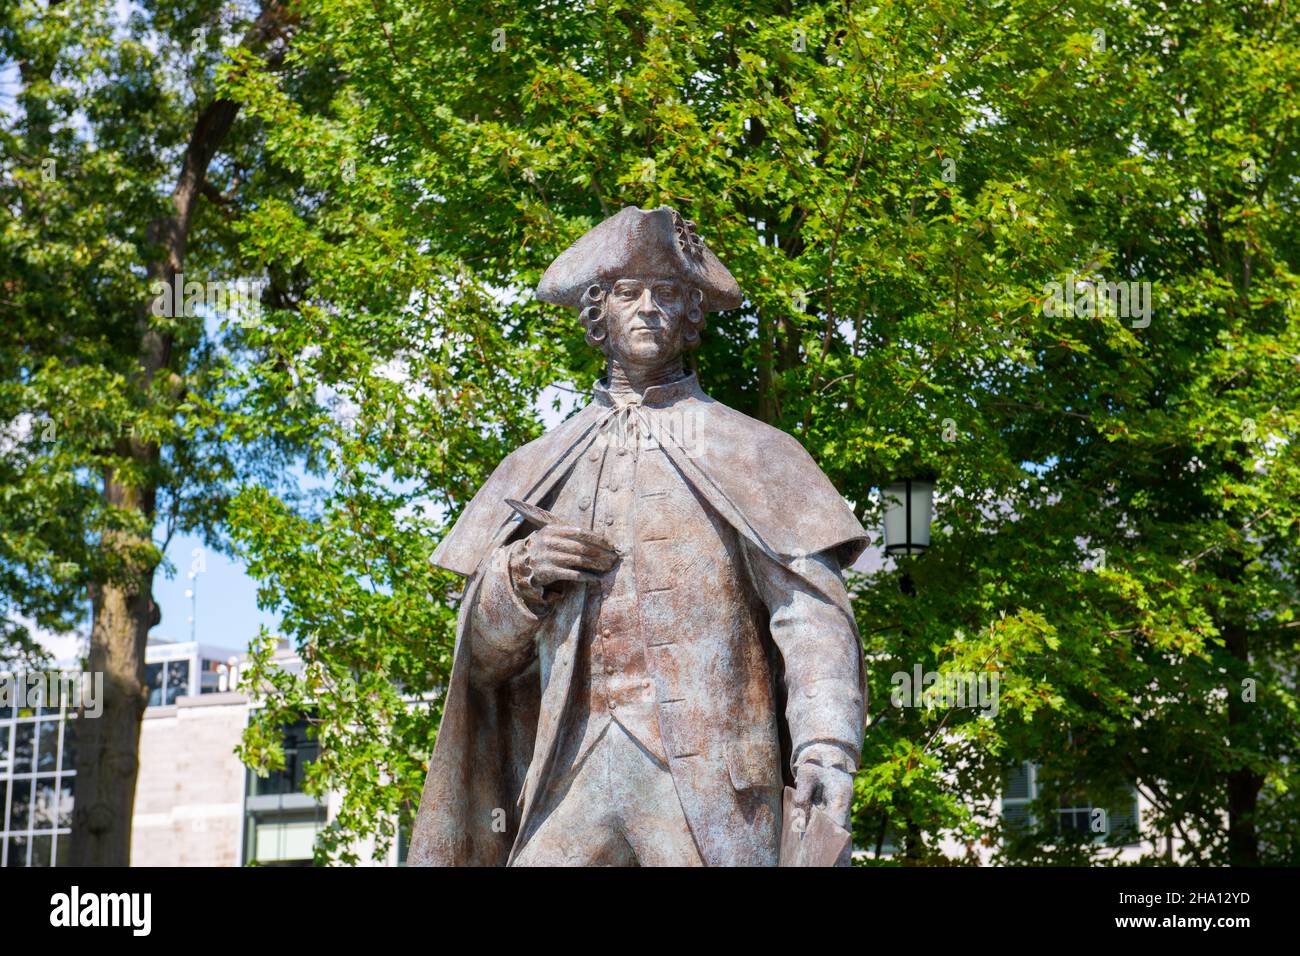 John Hancock statue at the Hancock Adams Green in Quincy Square in city center of Quincy, Massachusetts MA, USA. John Hancock was a founding father an Stock Photo